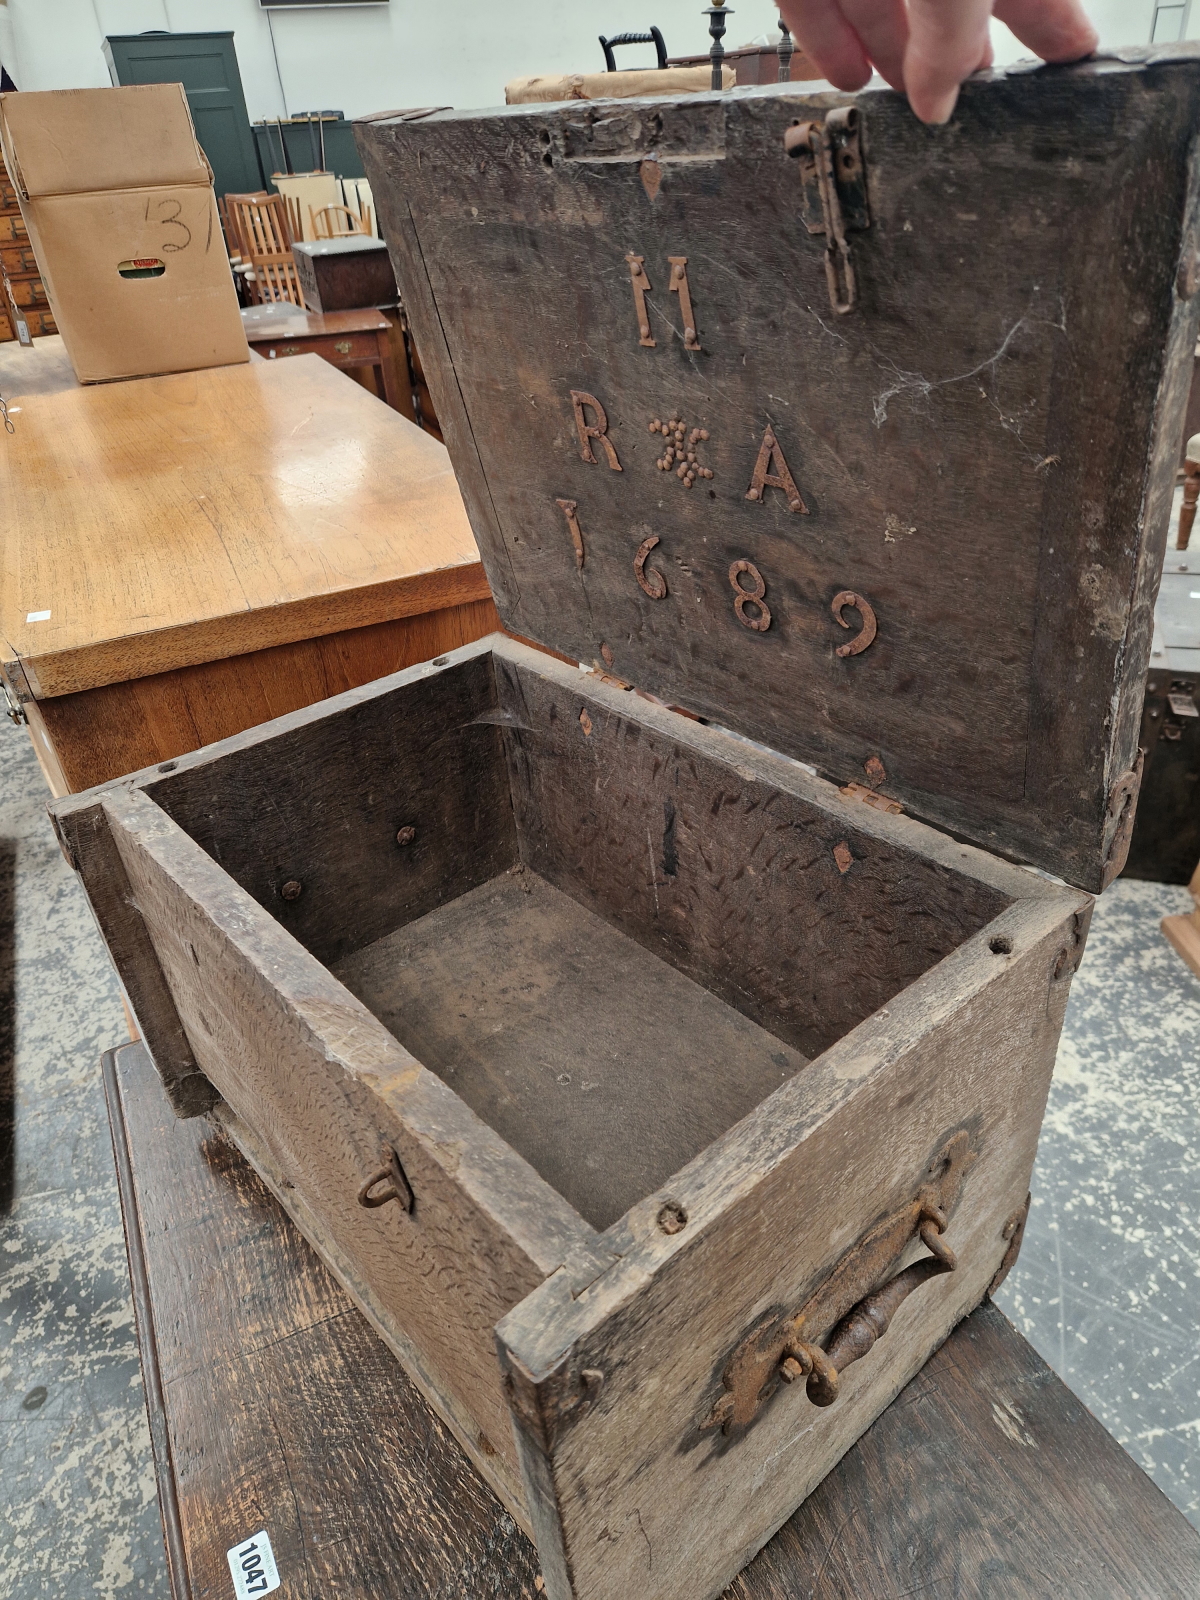 AN IRON BOUND TWO HANDLED OAK STRONG BOX BEARING THE DATE 1689 INSIDE THE HINGED LID - Image 4 of 7